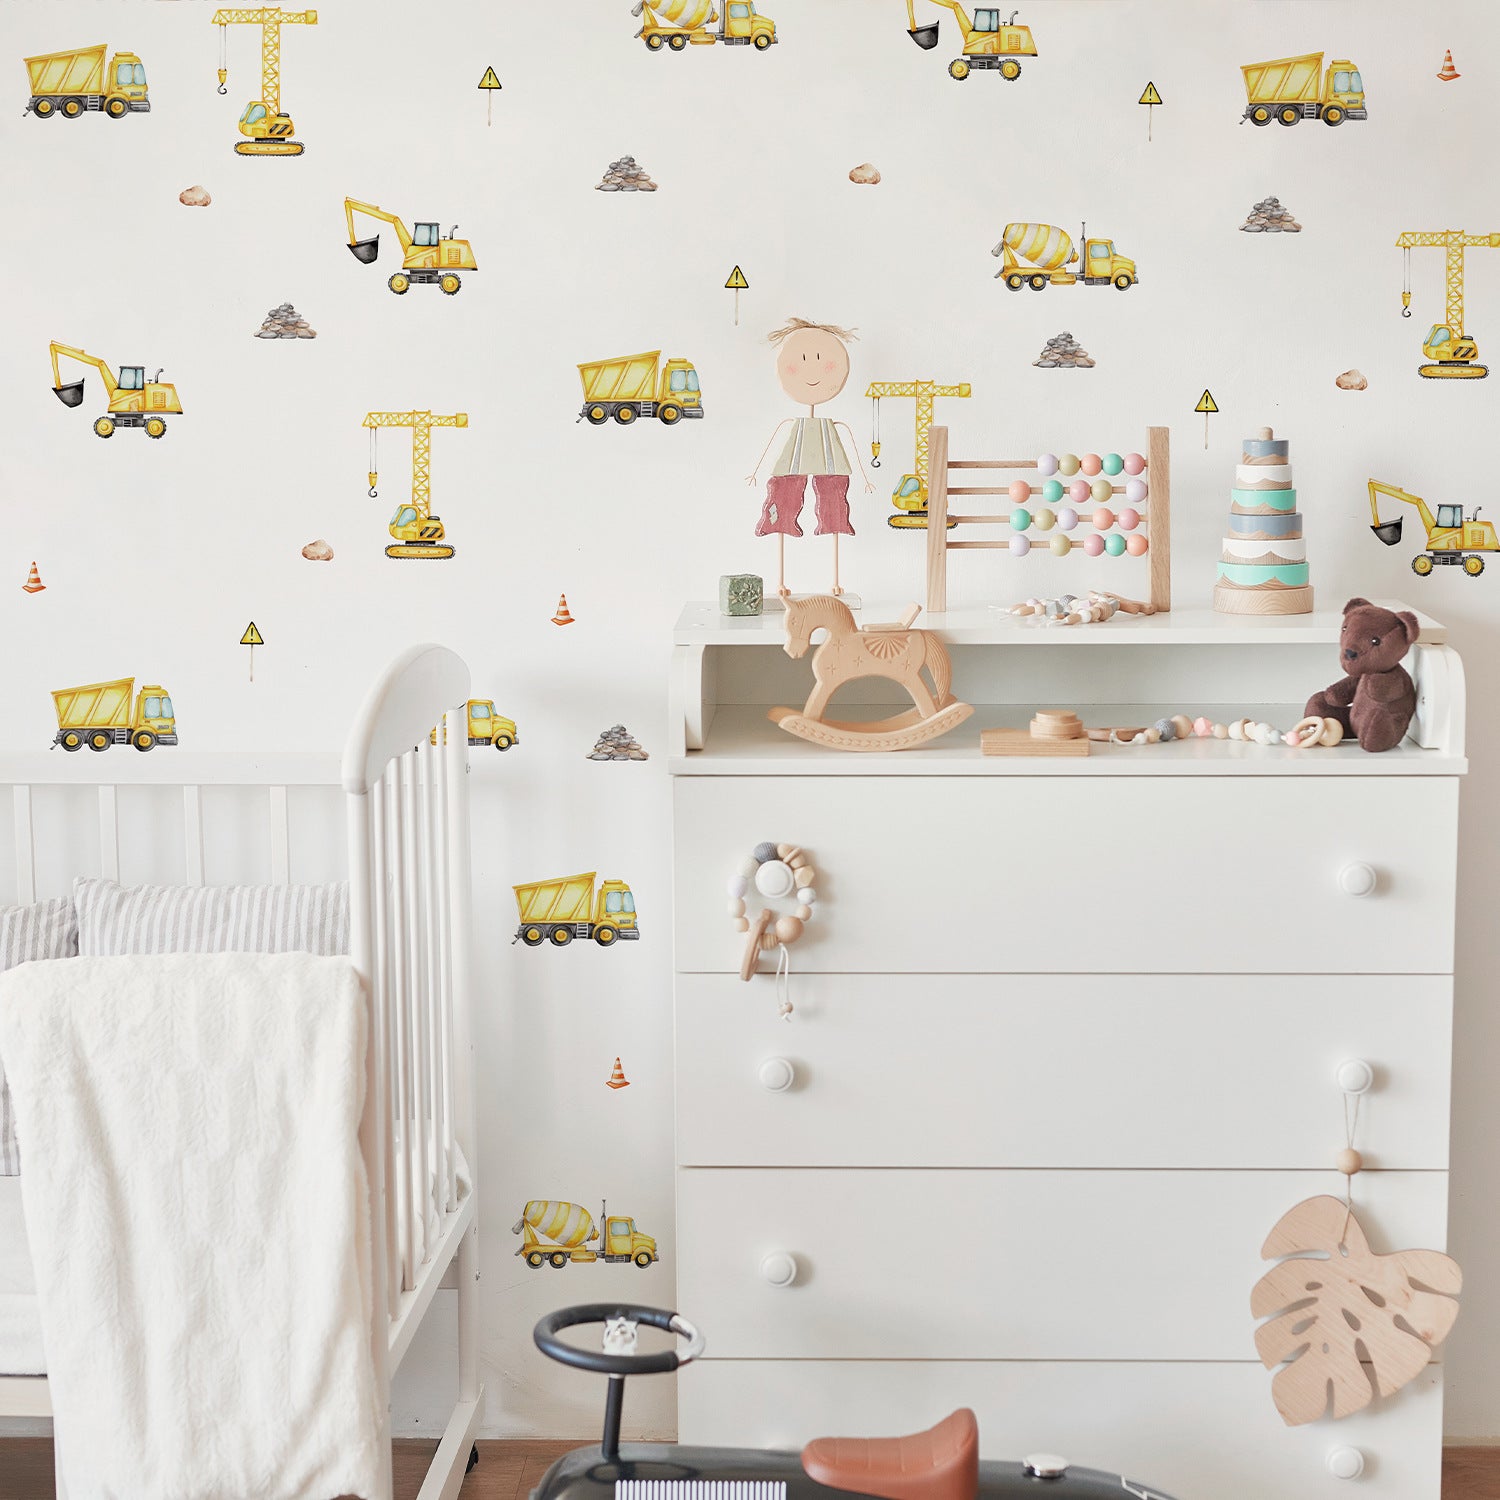 Construction Vehicles Wall Decals - 40 Decals - Taylorson